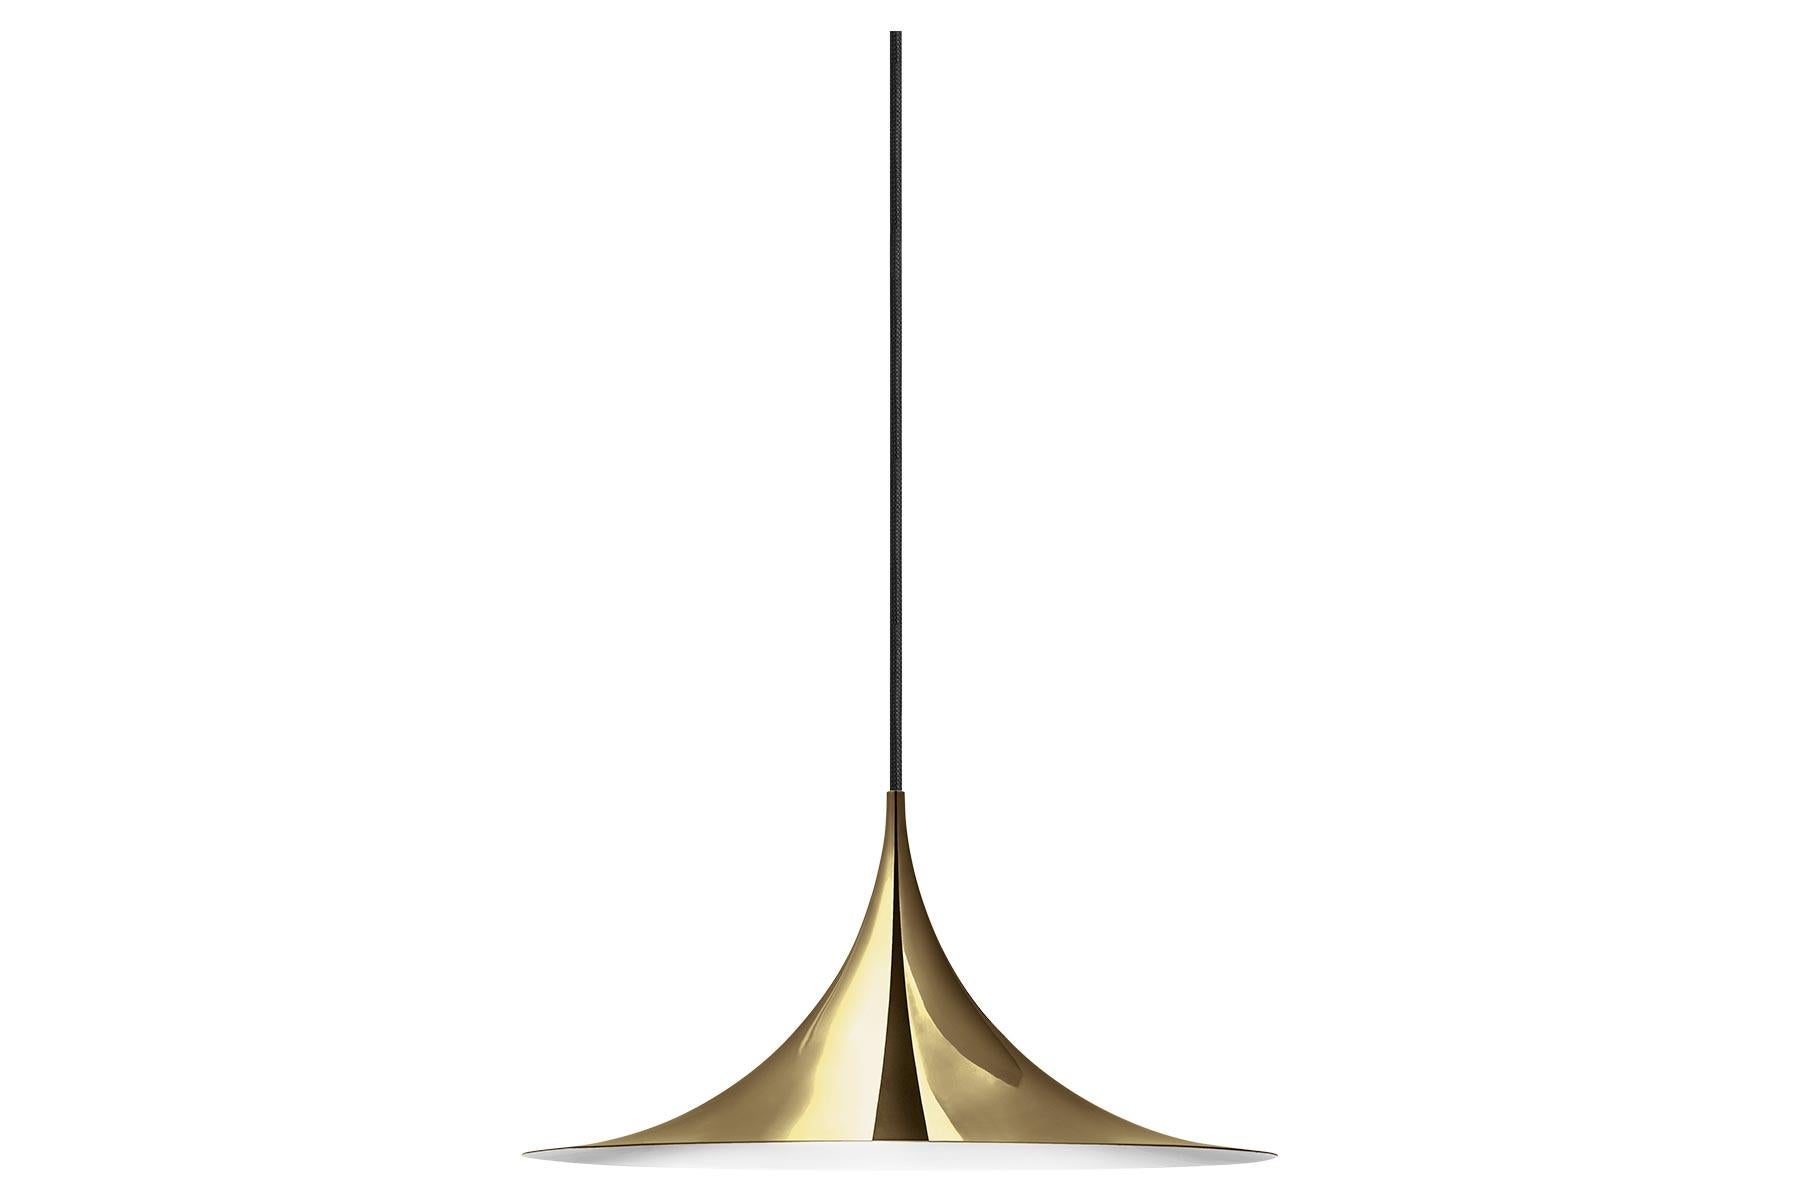 The semi pendant is a unique pendant lamp, based on two quarter-circles put together, back-to-back. Its distinctive arch-shaped, enameled metal shade creates a diffused, cone-shaped light, ideal over a dining table or kitchen work surface. With its